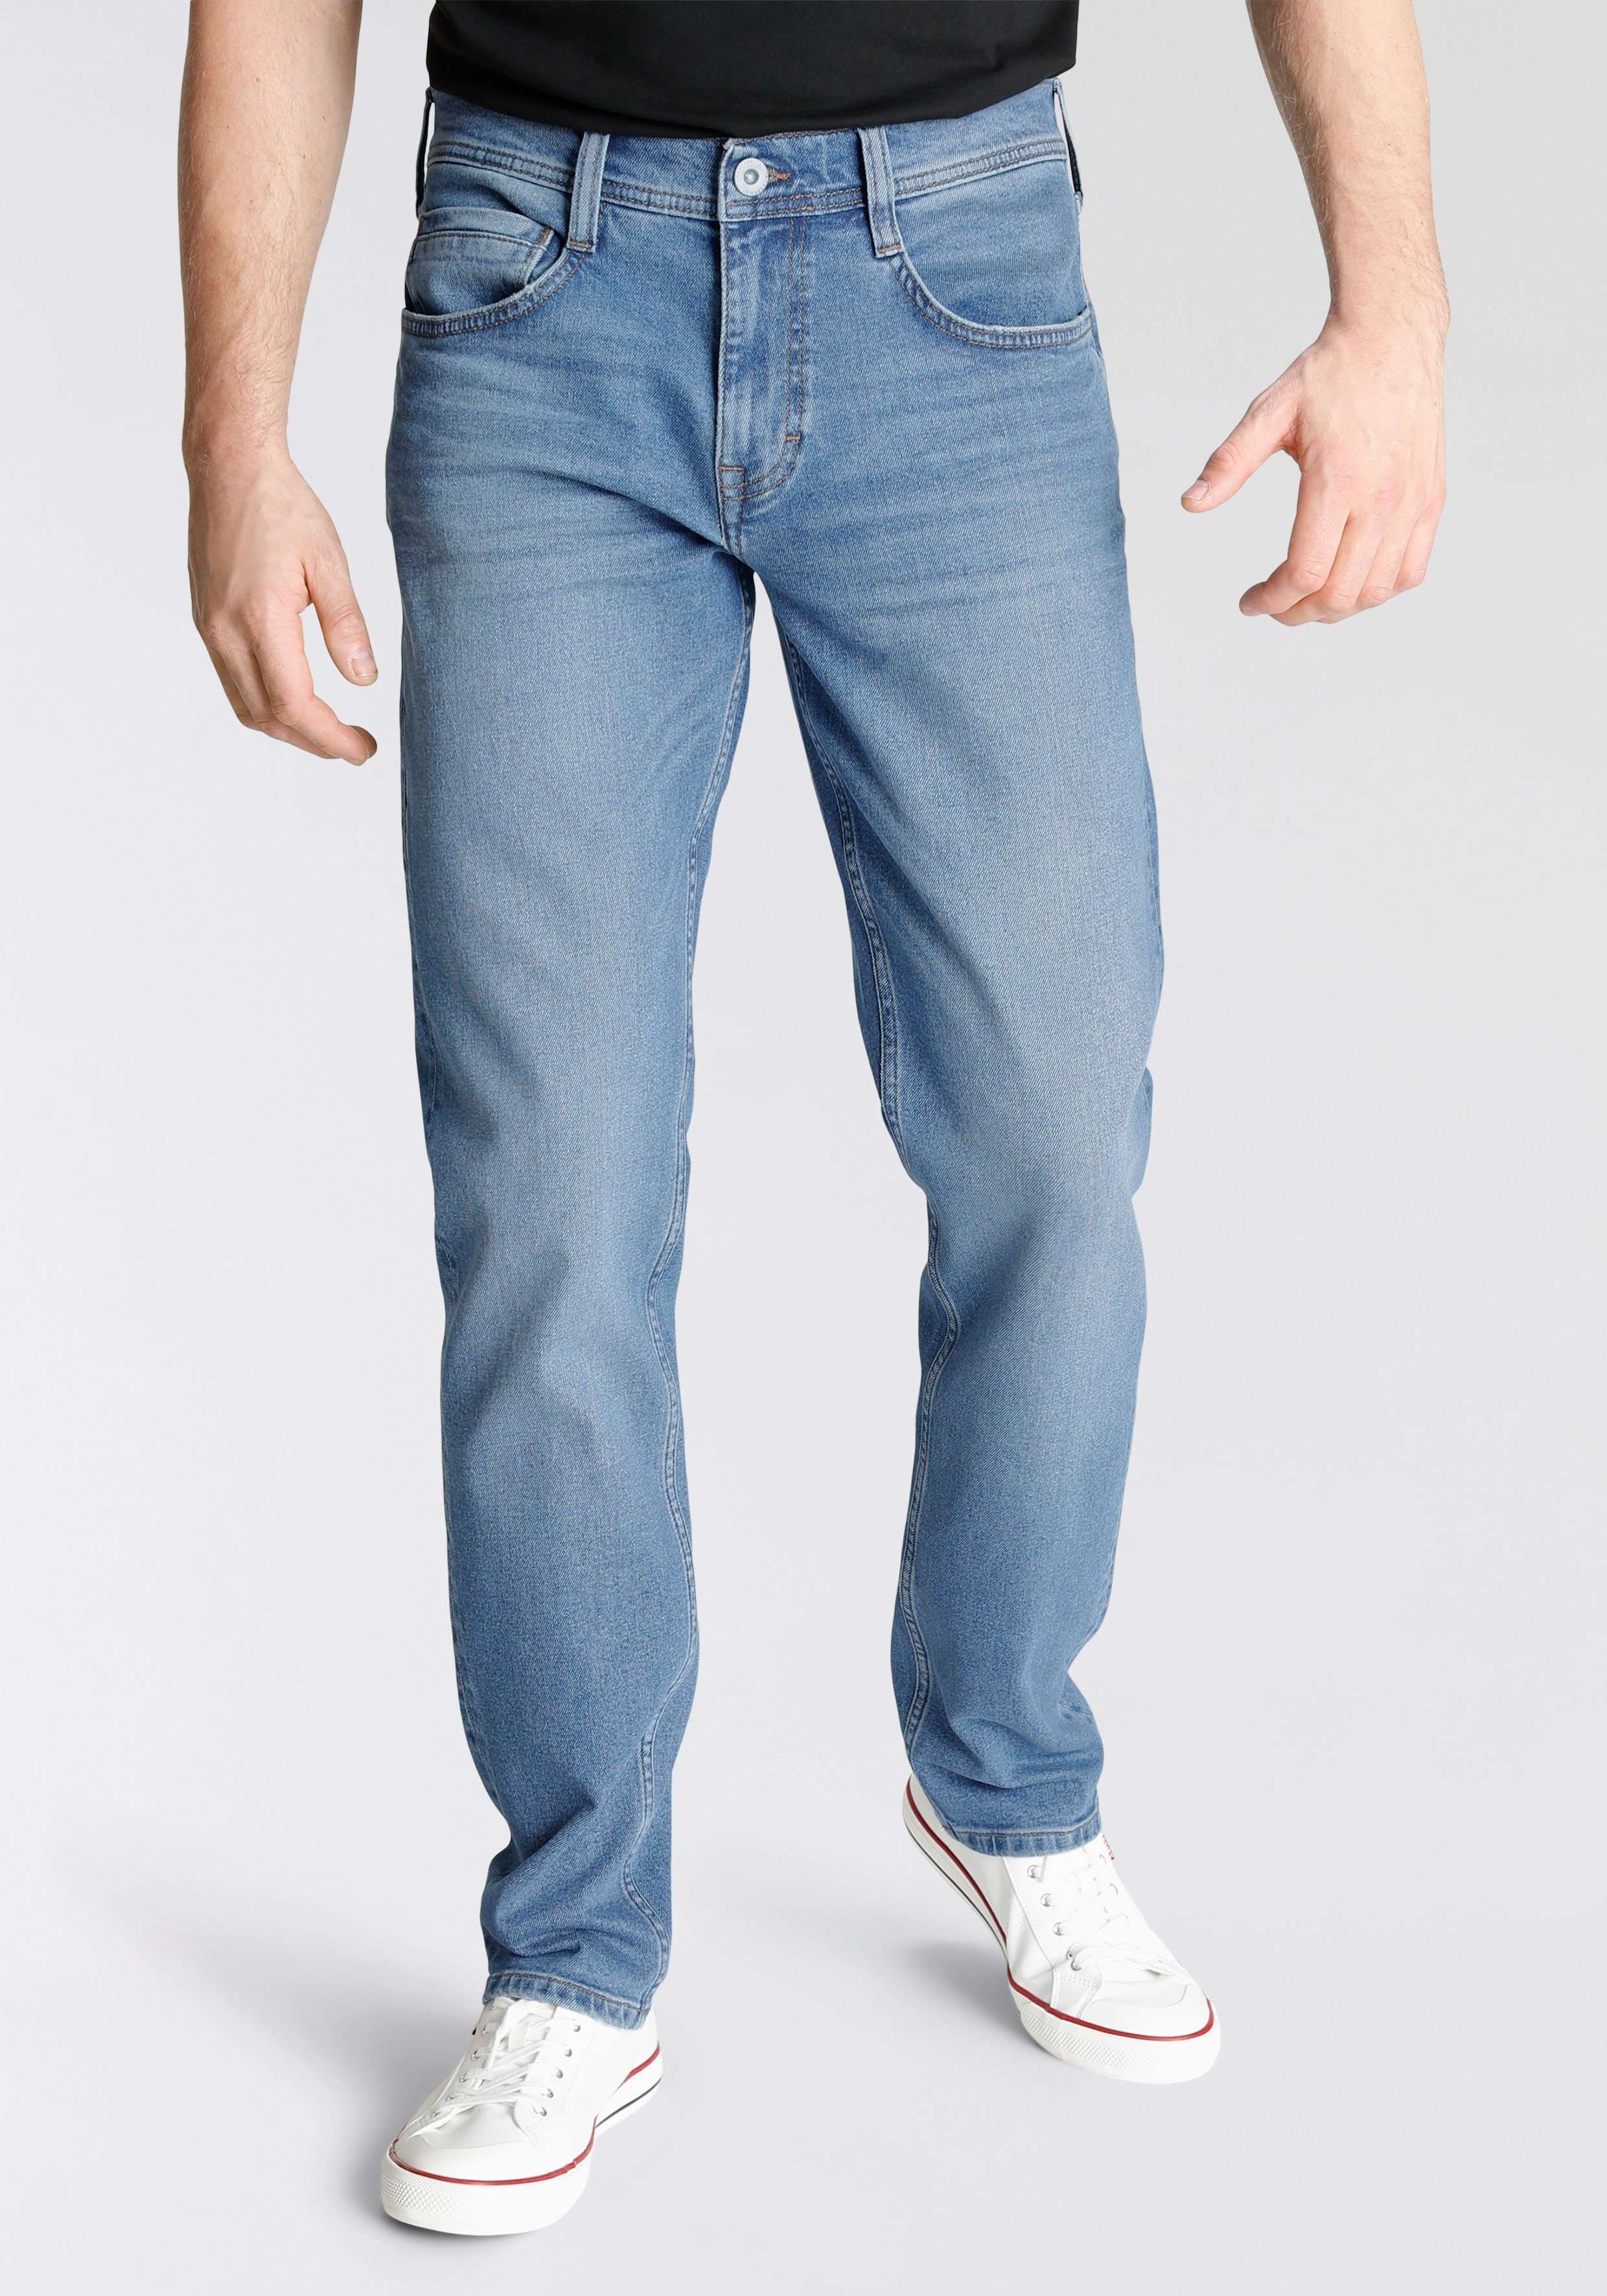 MUSTANG Straight-Jeans Style Denver medium blue washed